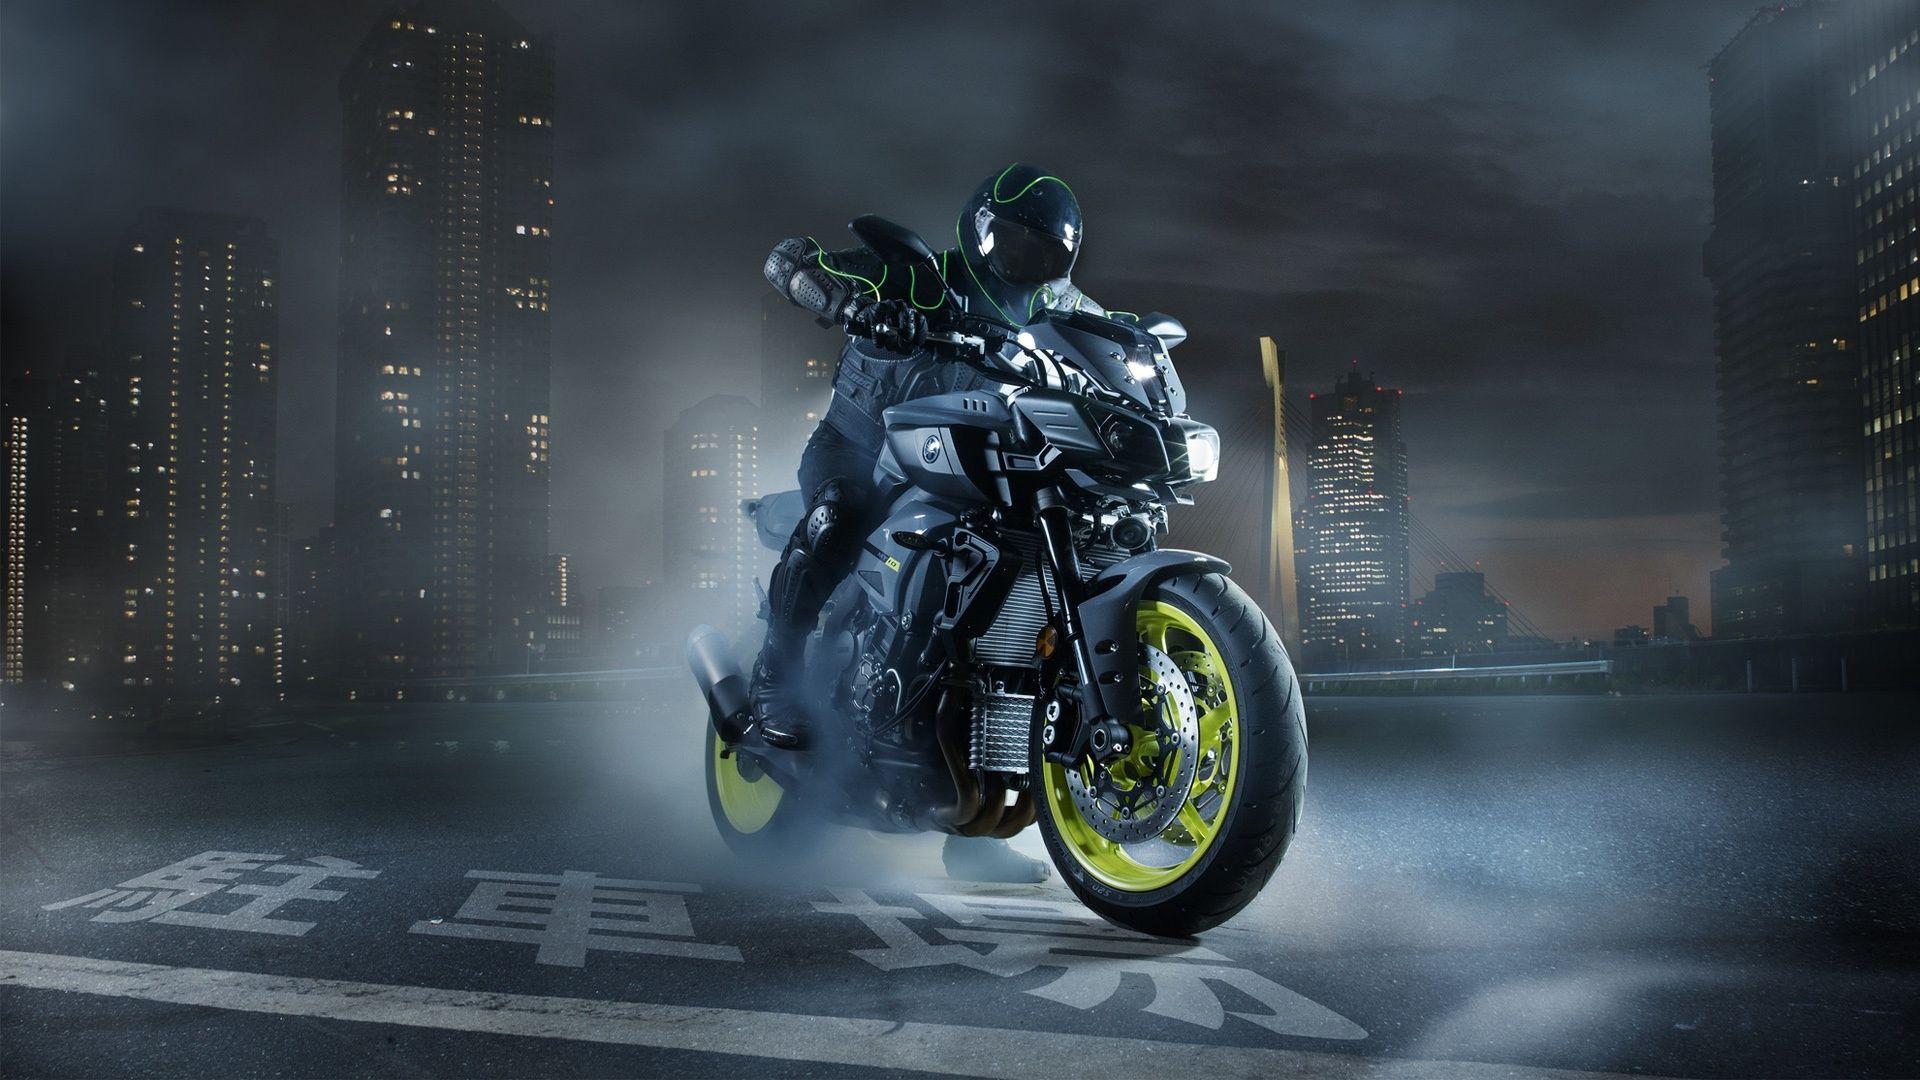 Yamaha MT 09 Wallpaper in jpg format for free download